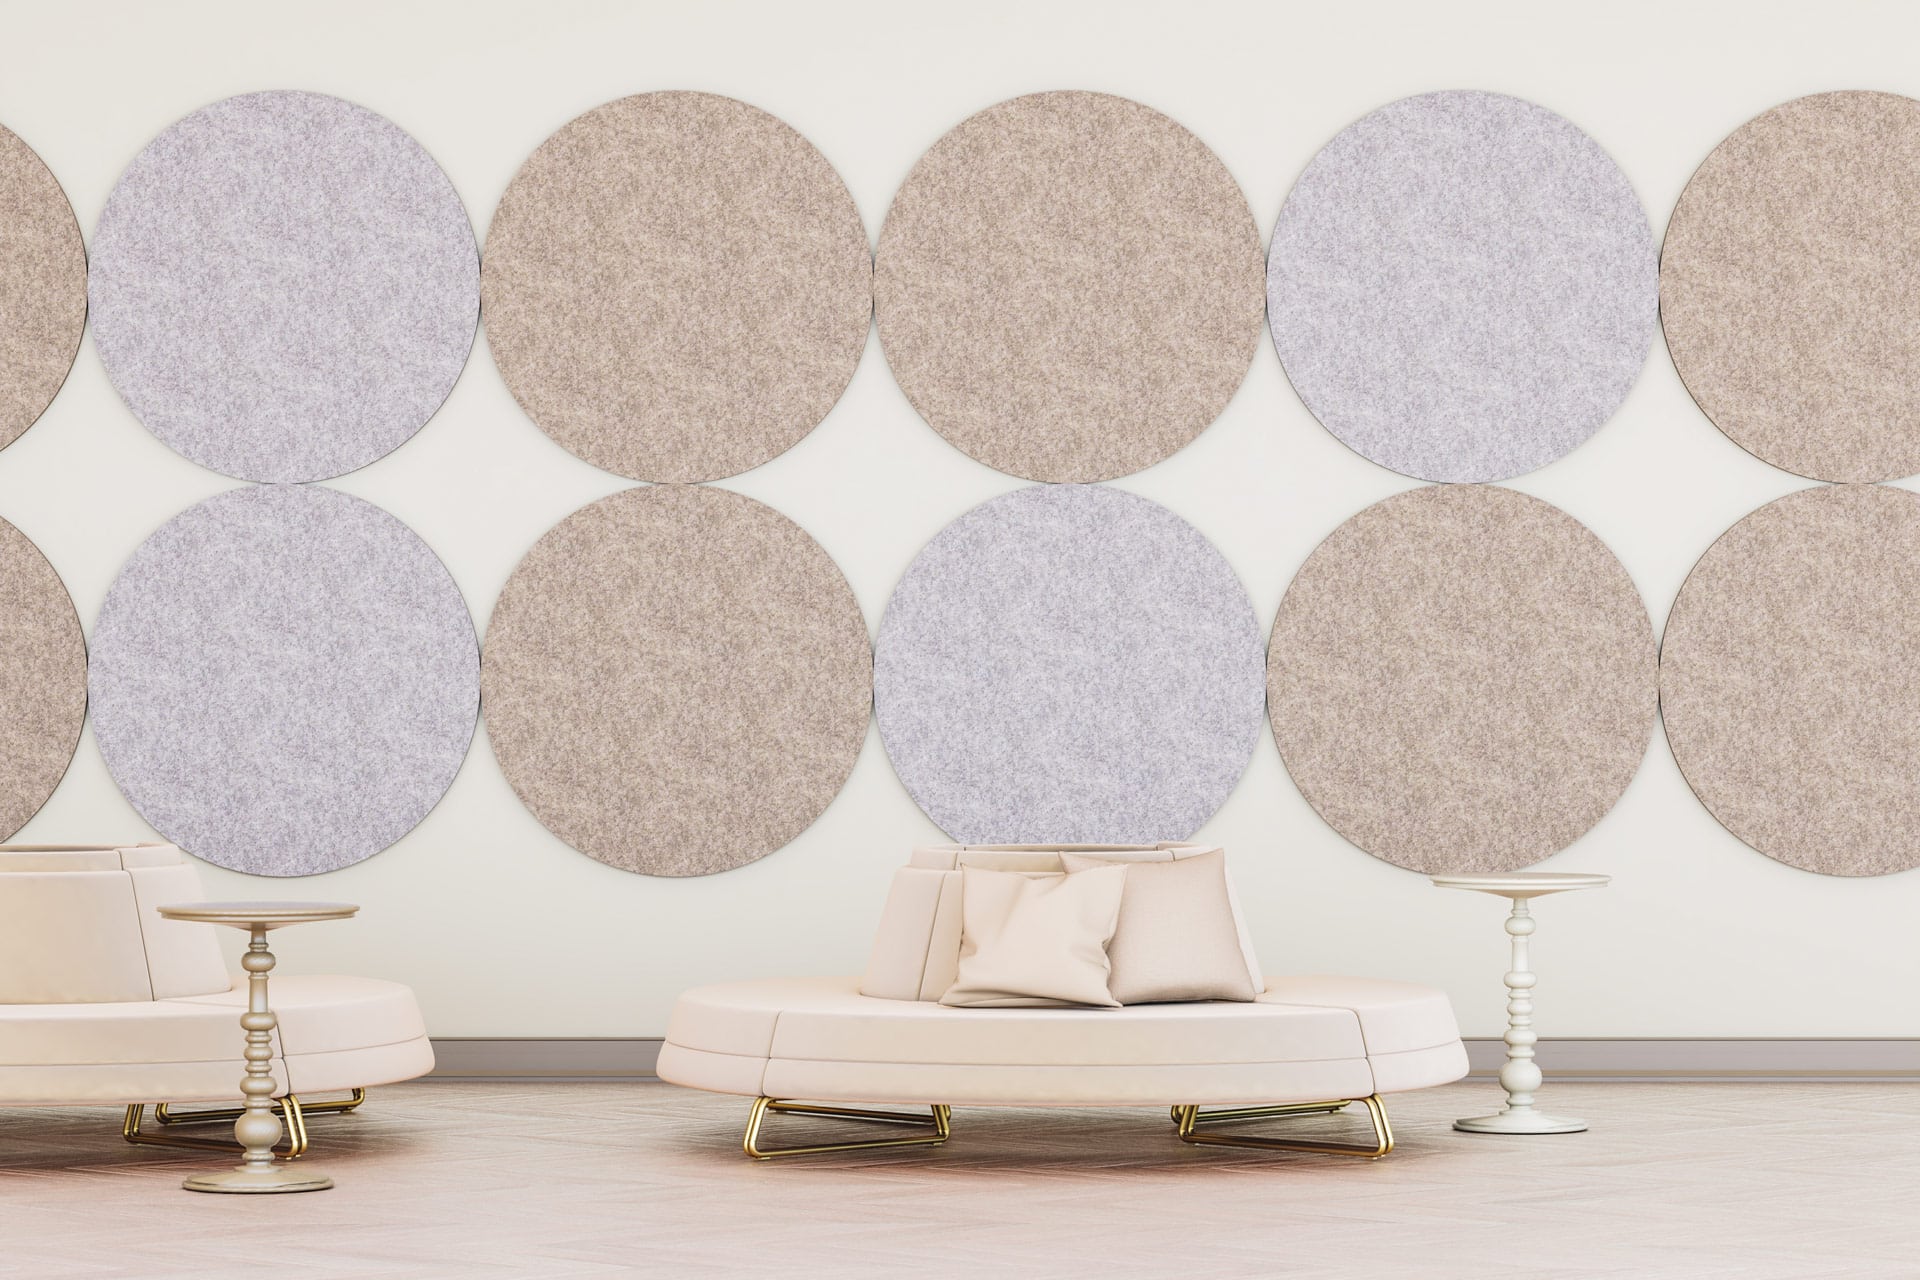 Circular decorative acoustic panels on the wall in a waiting room